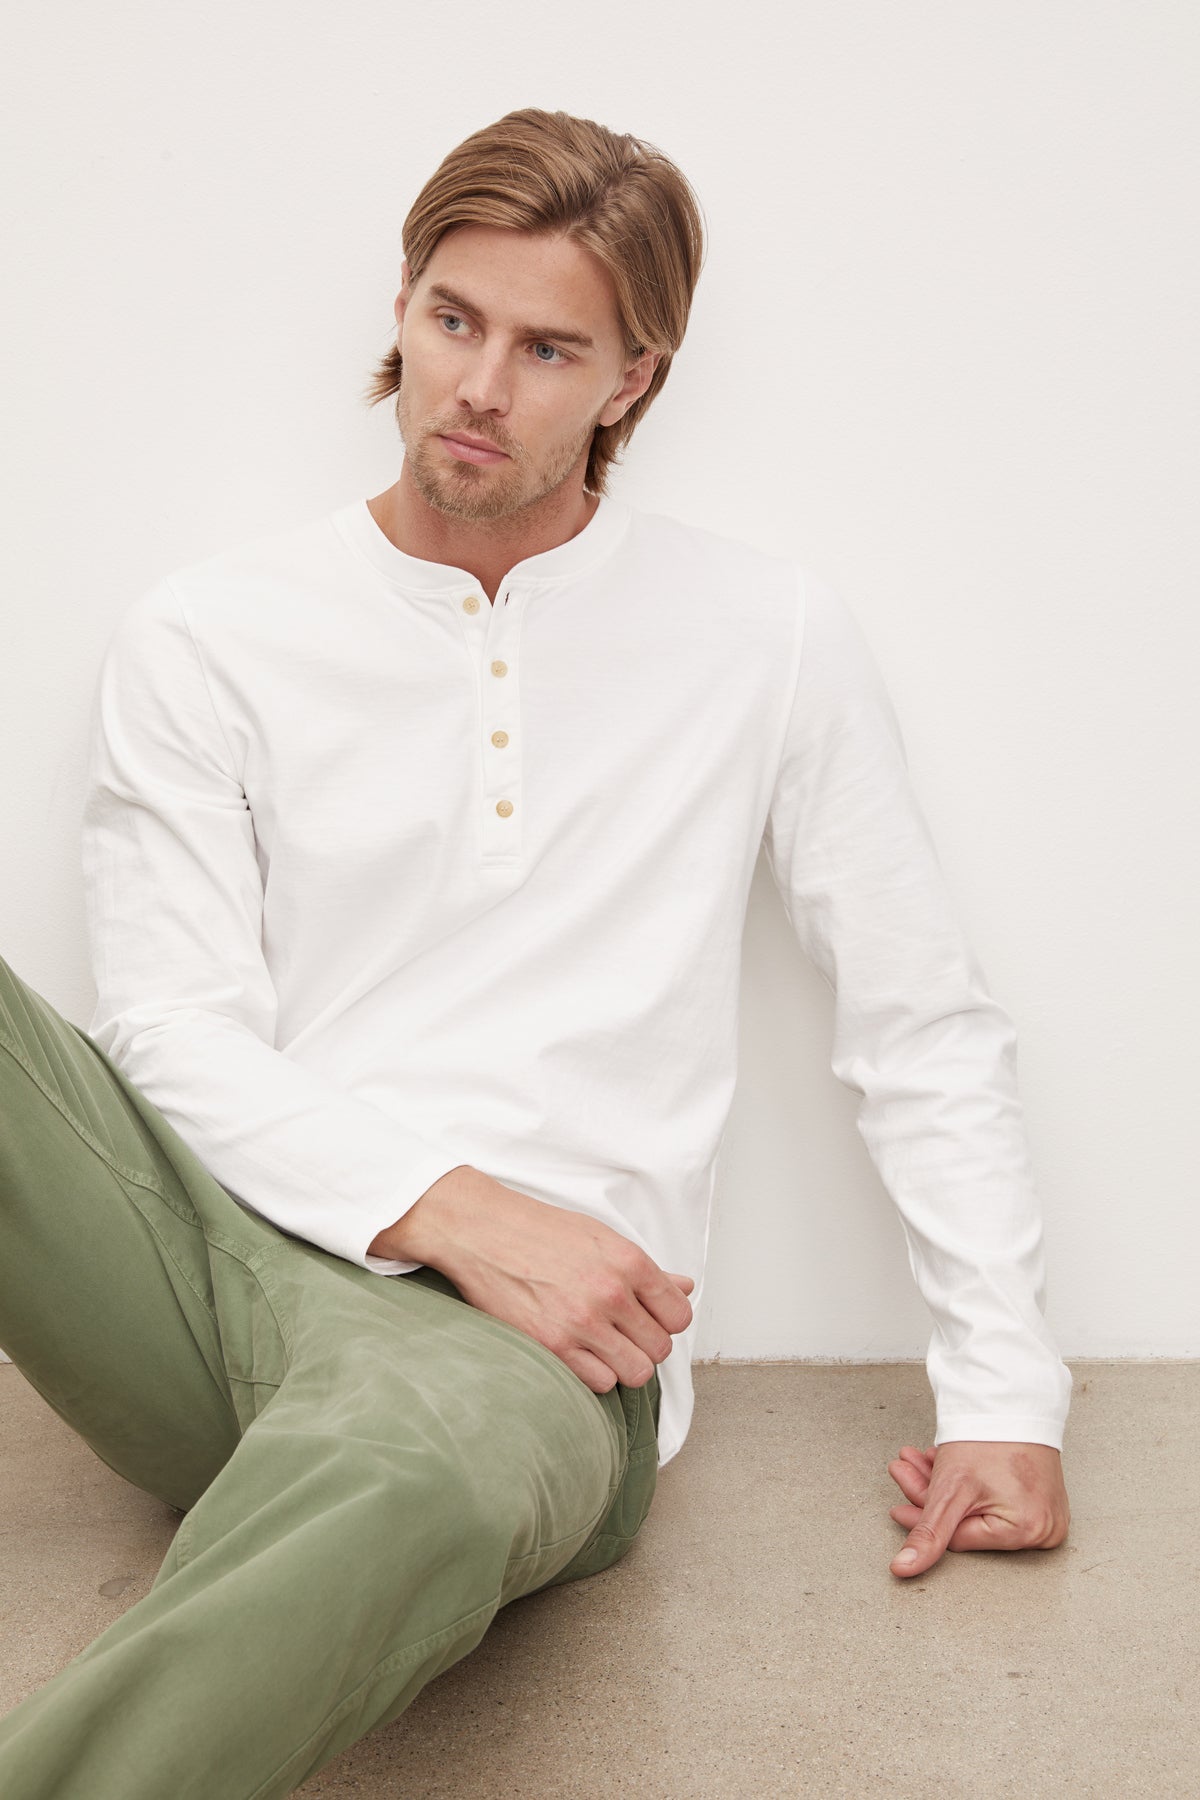   A young man with blond hair wearing a white long-sleeve cotton Velvet by Graham & Spencer HOLT HENLEY henley shirt and olive green pants, sitting against a white wall, looking to his left. 